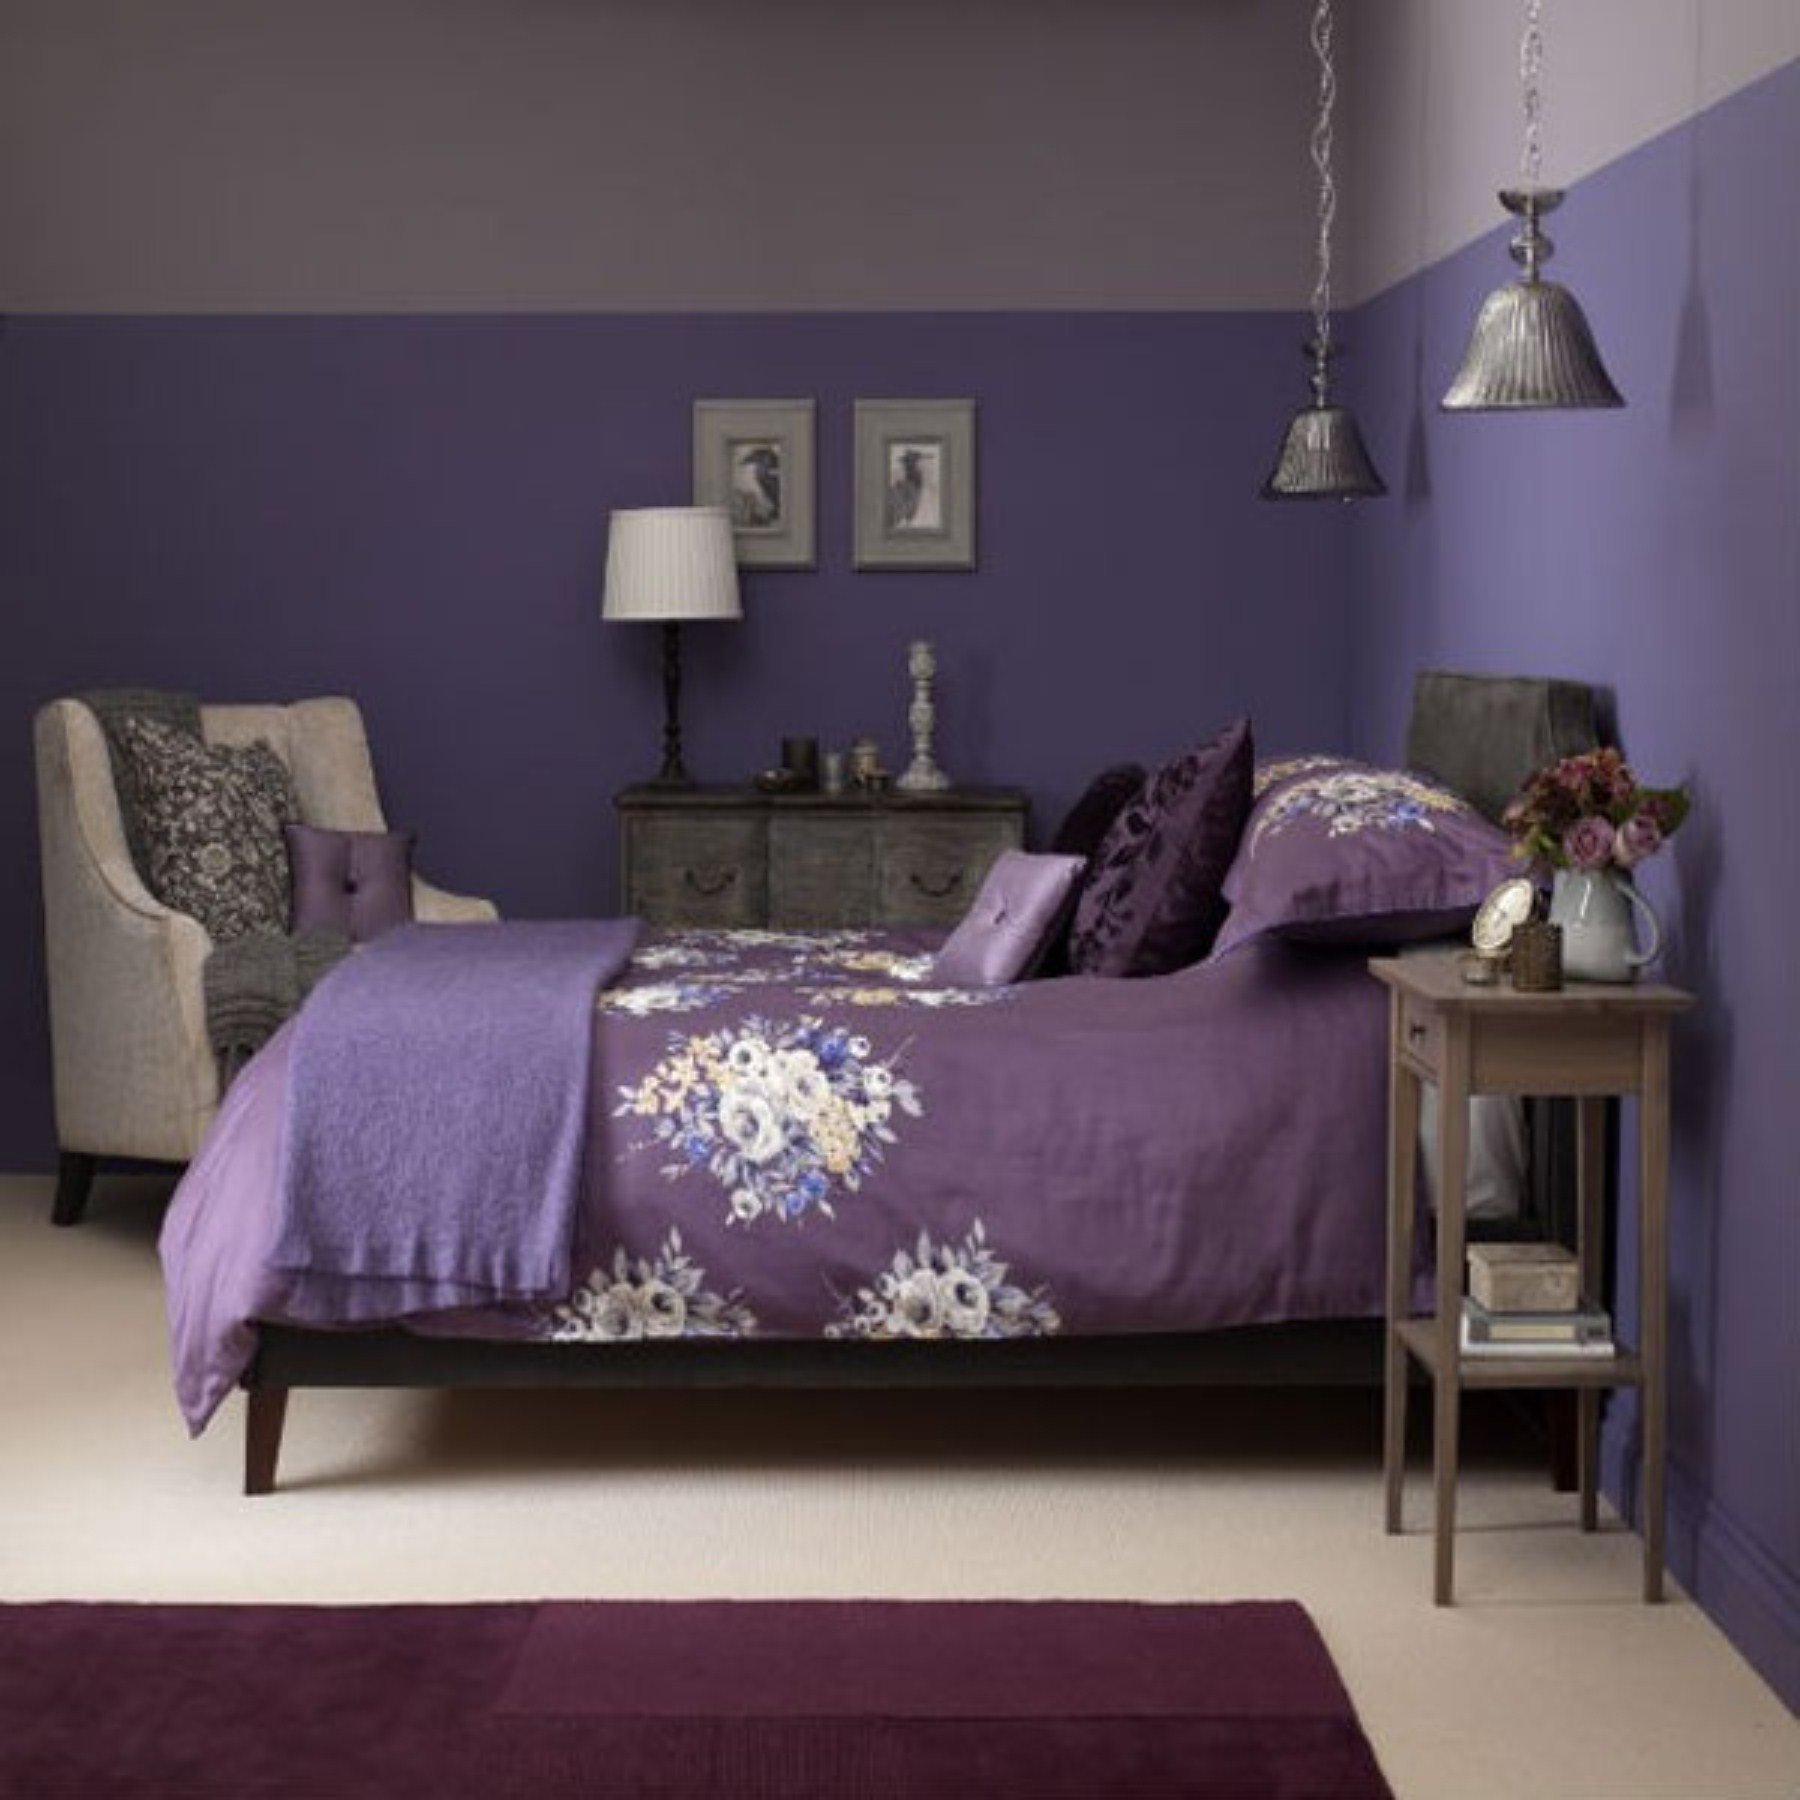 Create a Lavender Color in a Gradient Style